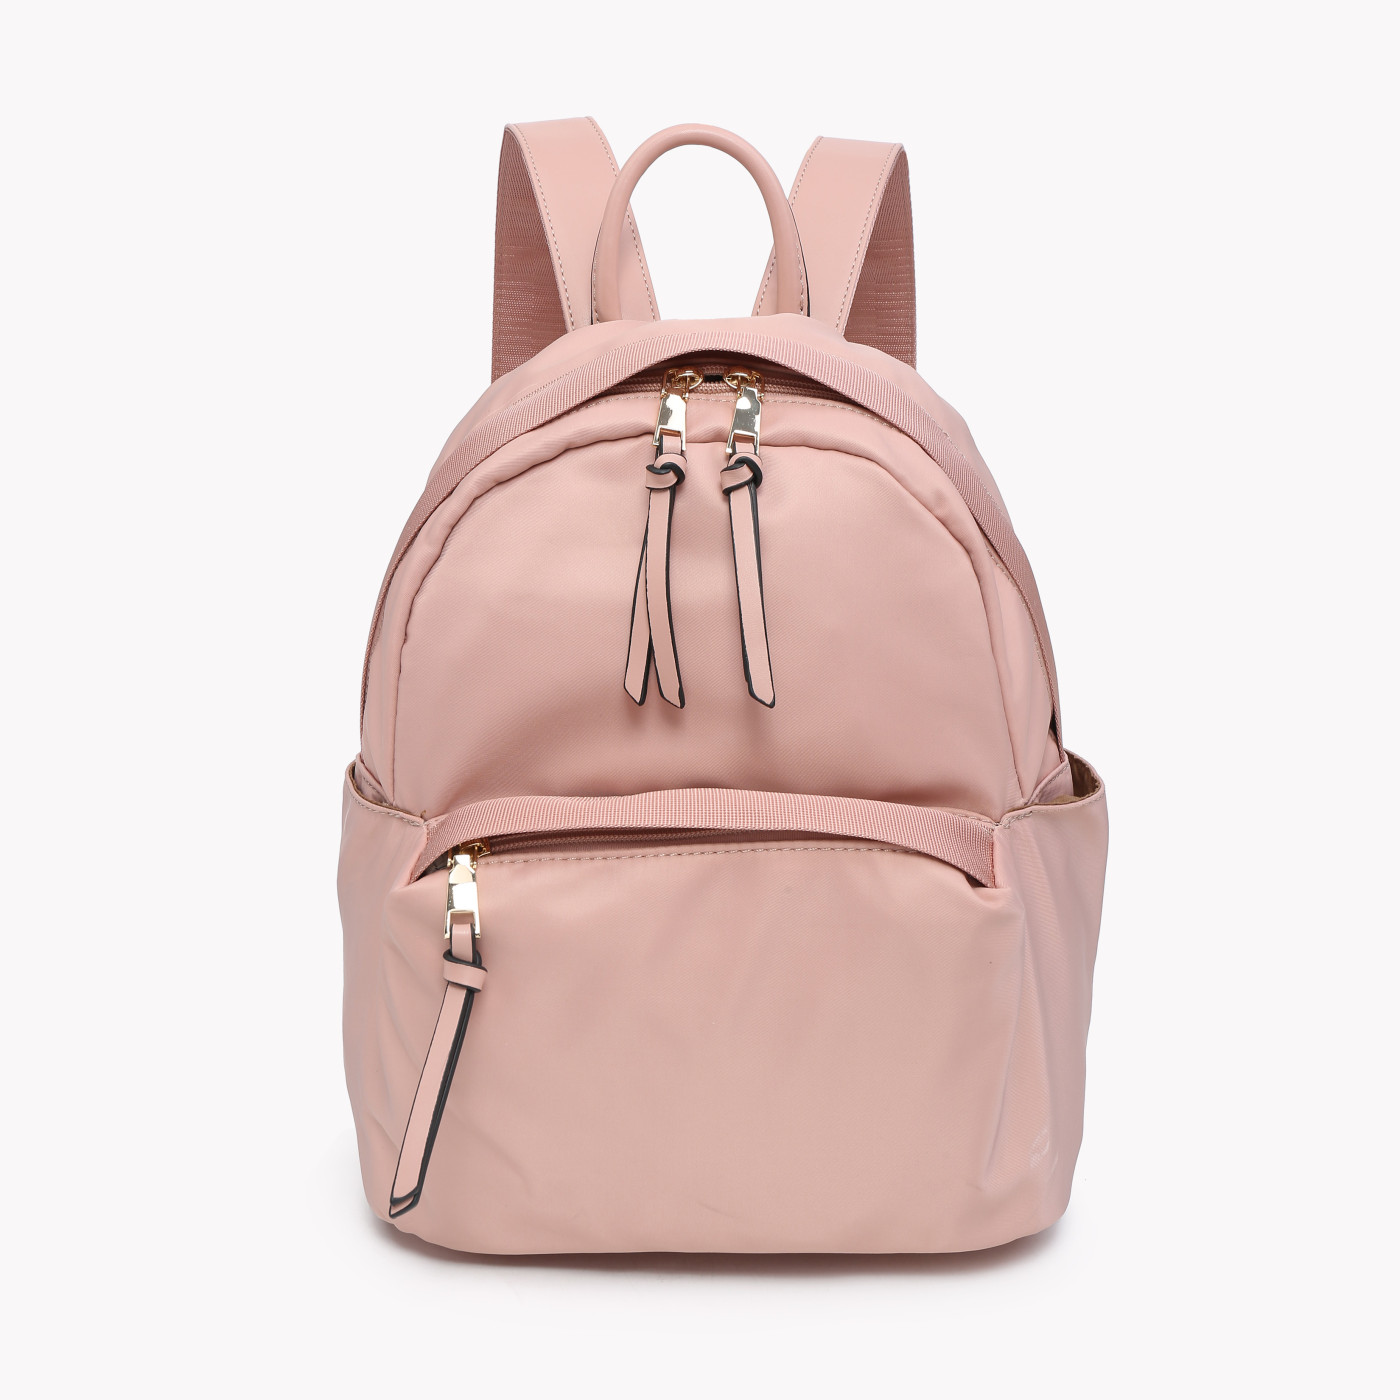 2-In-1 Nylon Backpack And Bag Black | Parfois